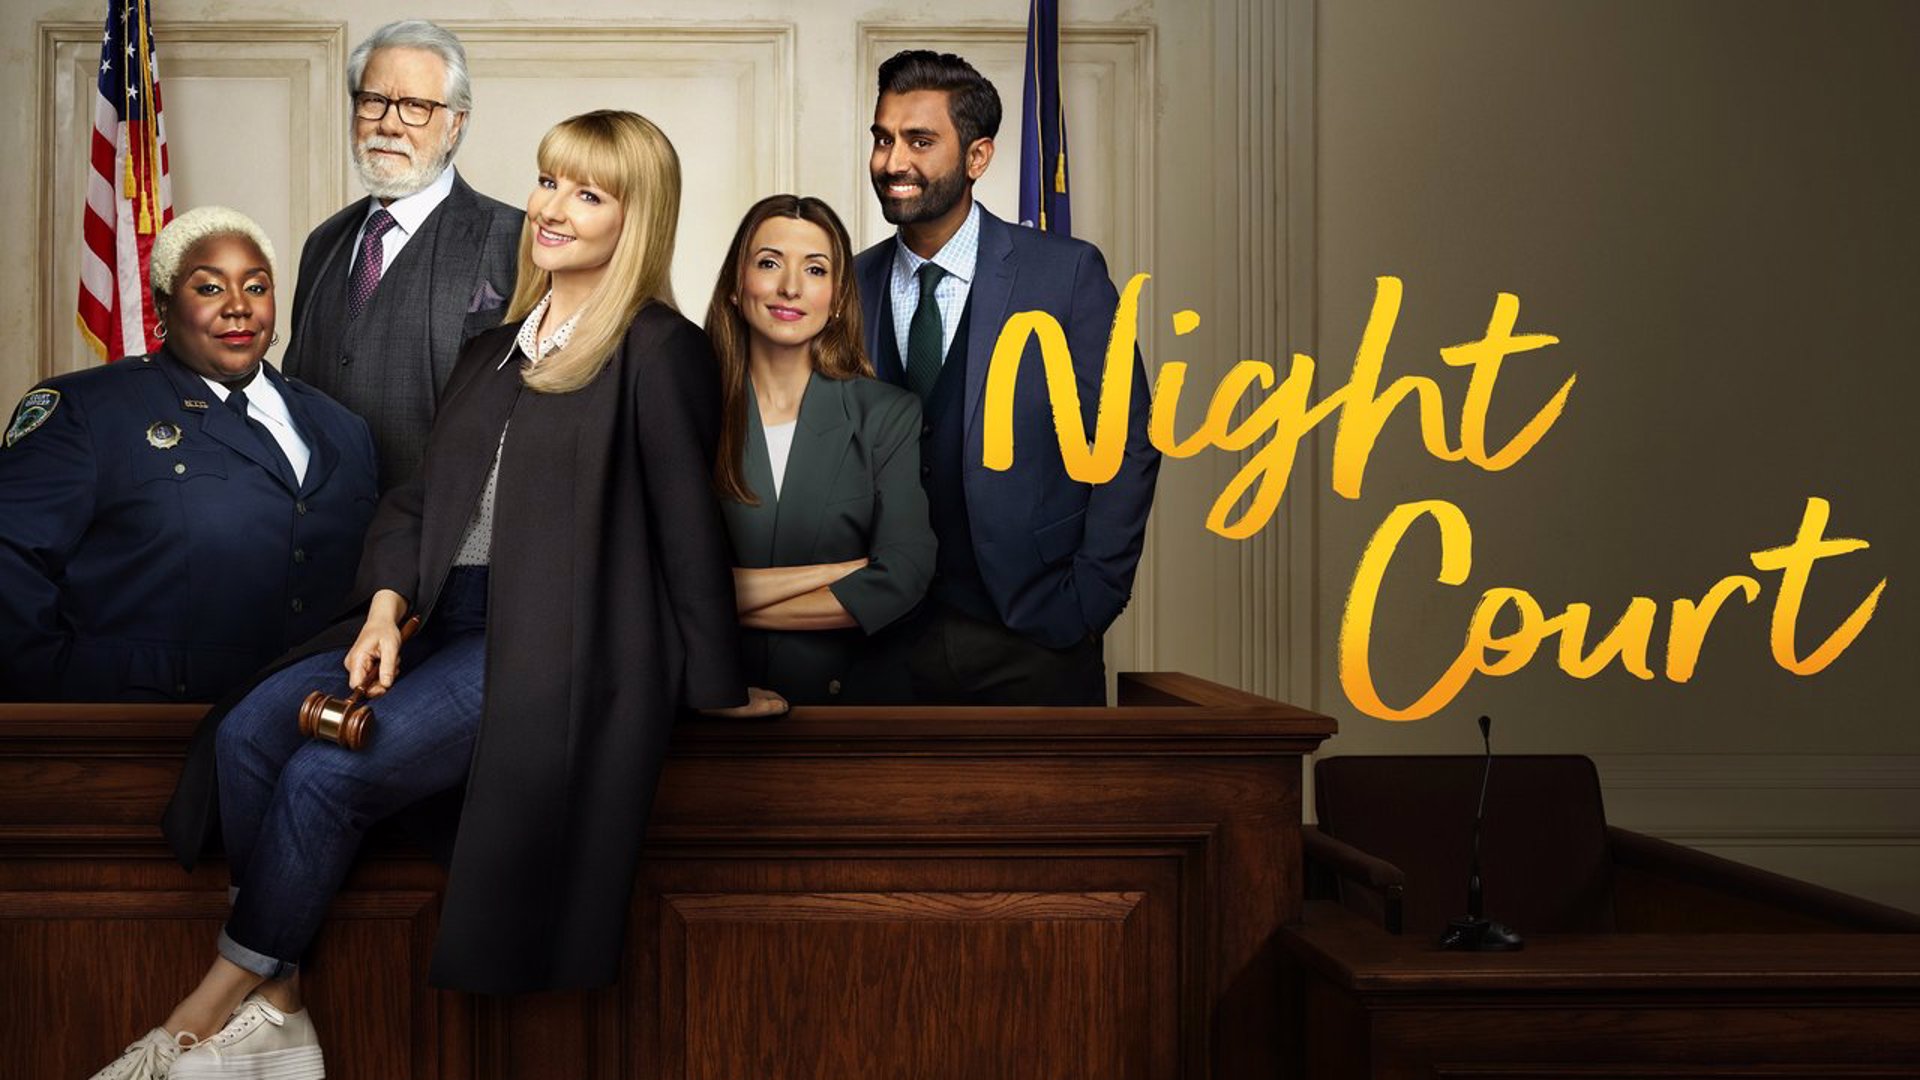 Preview New #39 Night Court #39 on 11Alive 11alive com